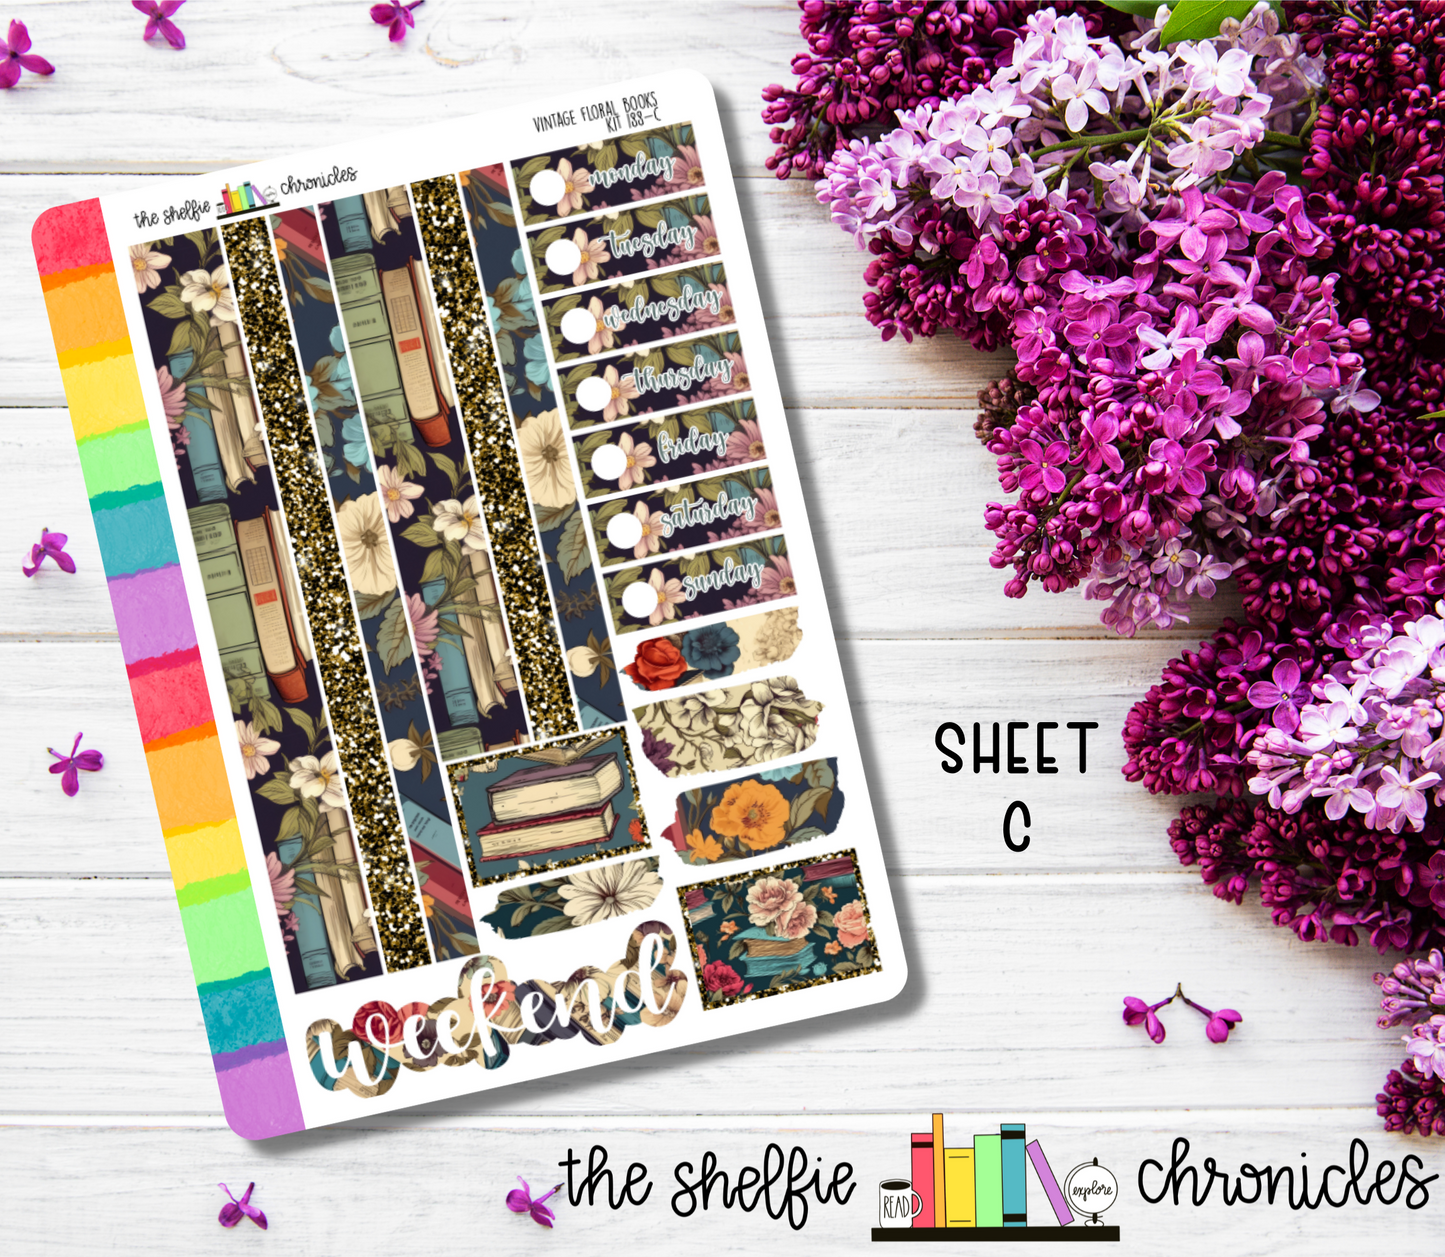 Kit 188 - Vintage Floral Books Weekly Kit - Die Cut Stickers - Repositionable Paper - Made To Fit 7x9 Planners